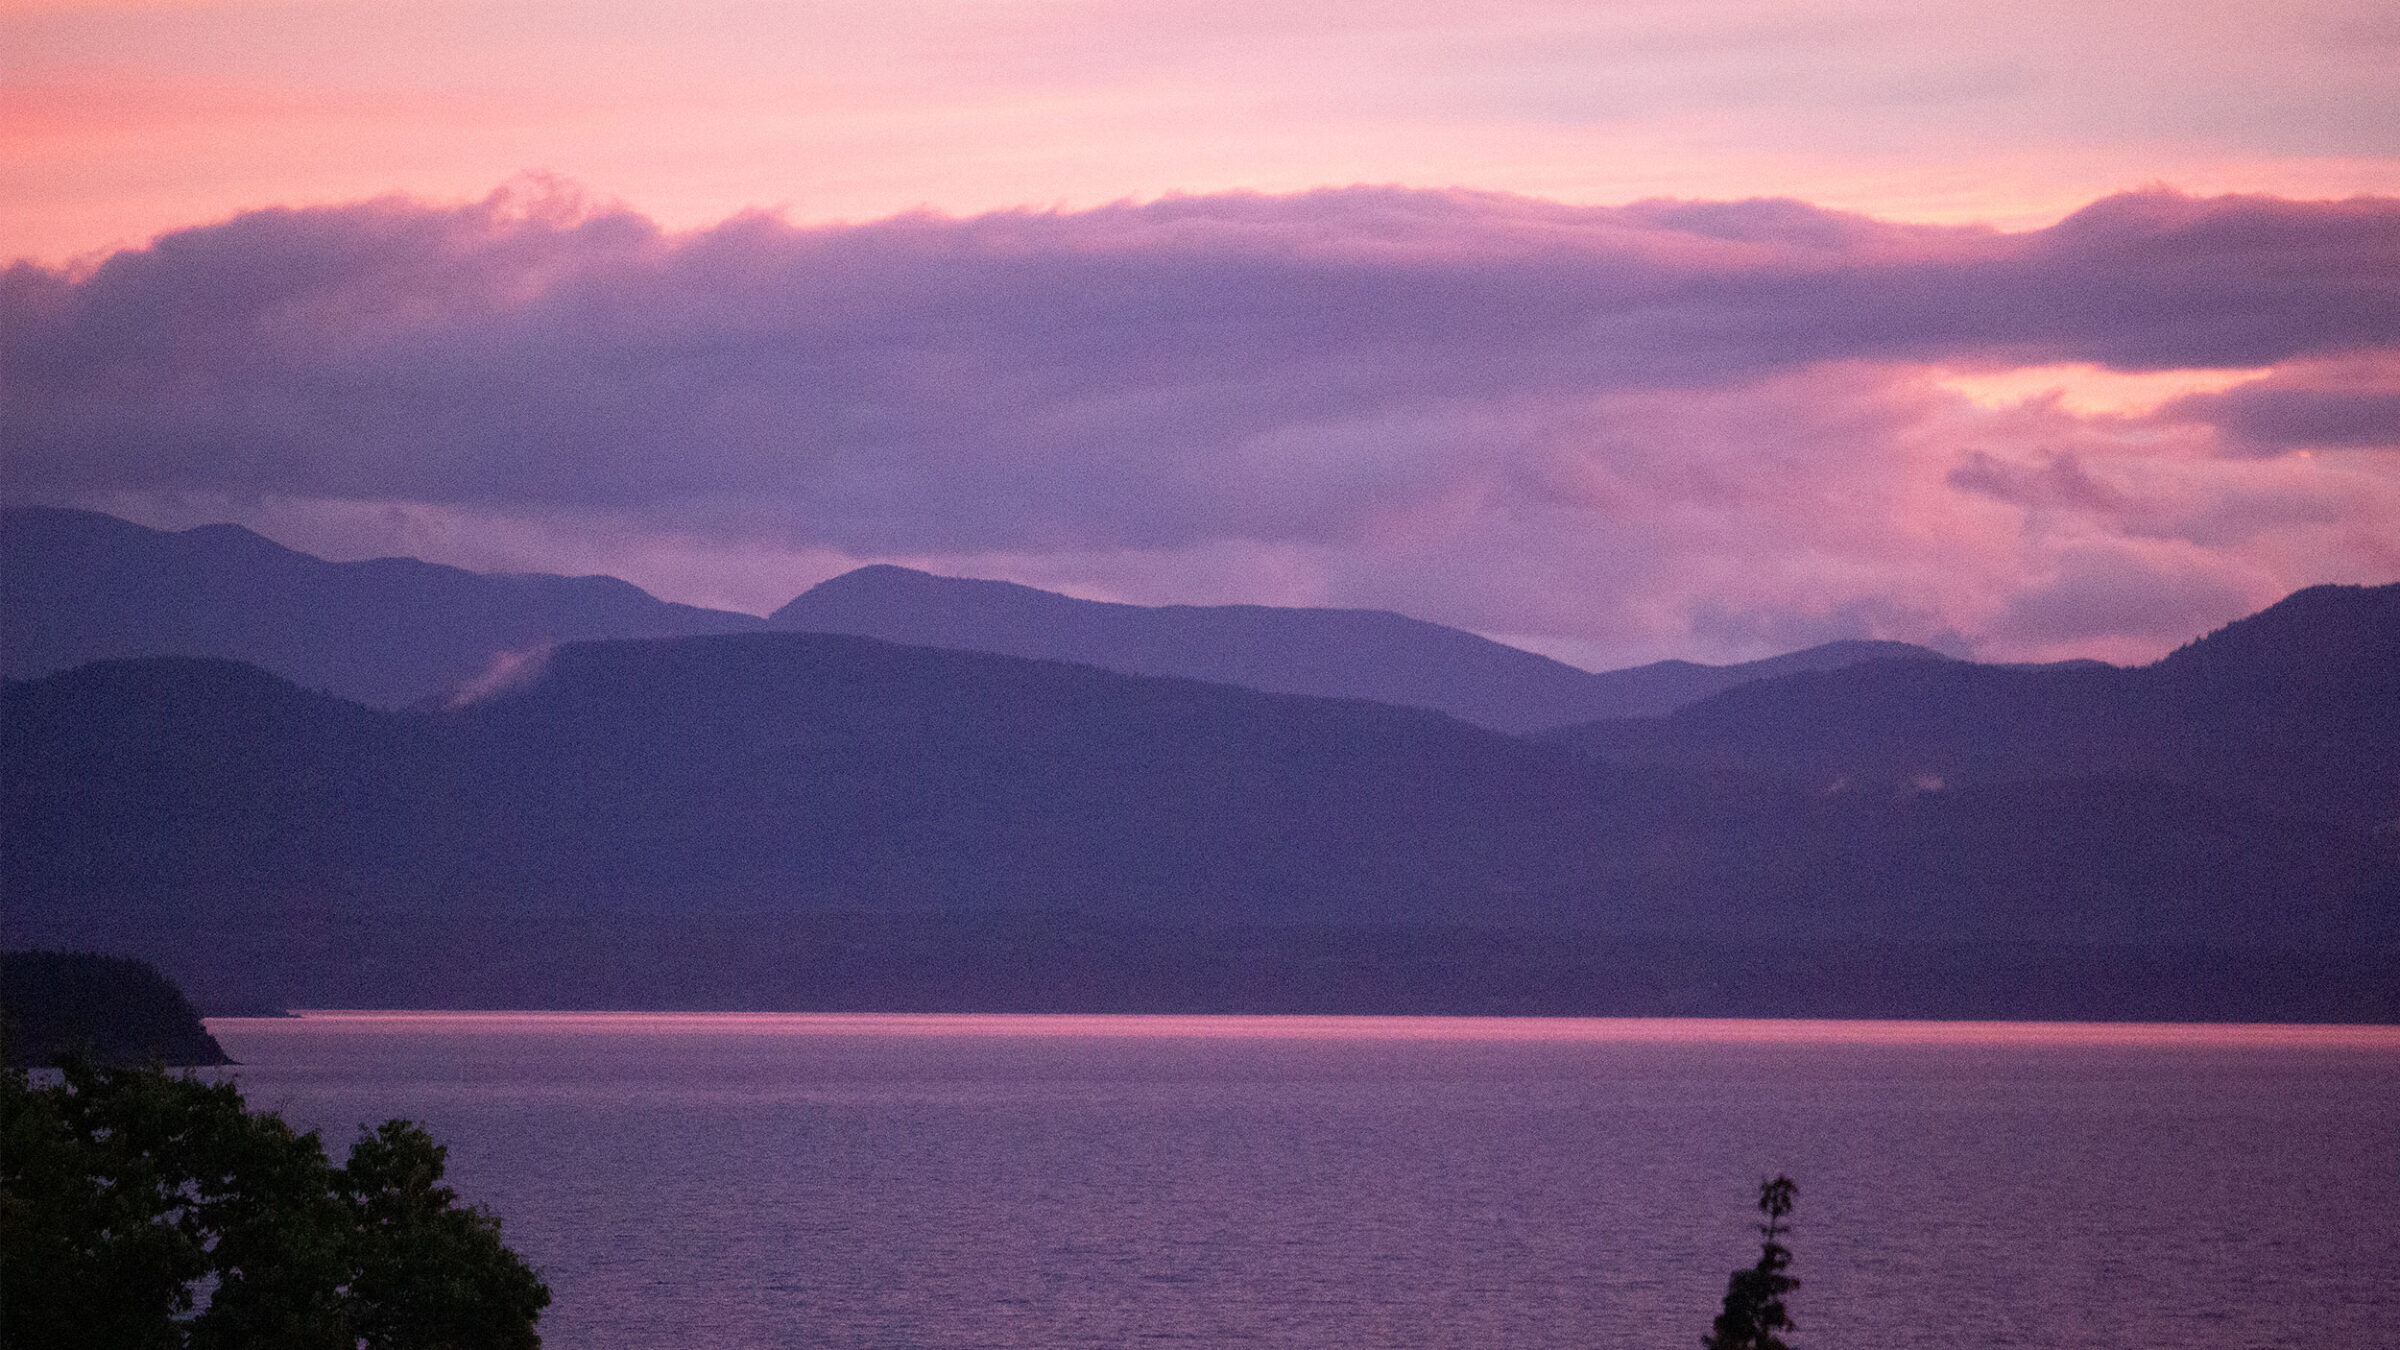 pink and purple hue on the mountains and lake champlain at sunset